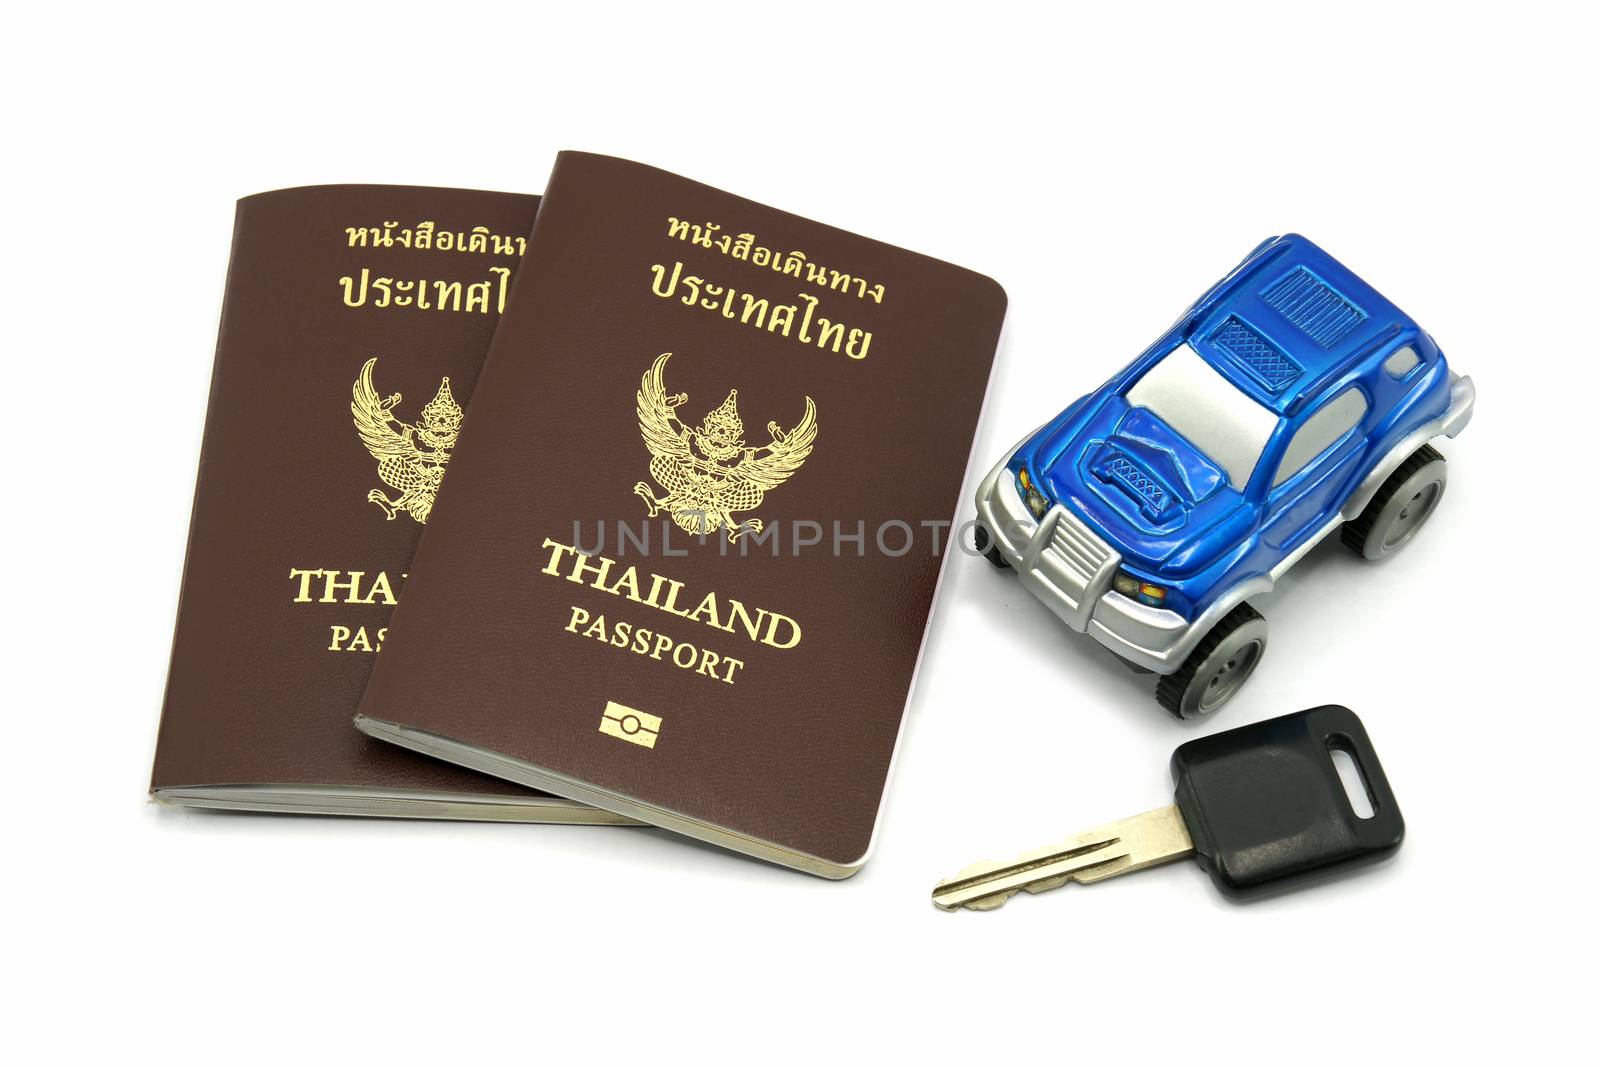 Thailand Passport and Car for Travel Concept by mranucha